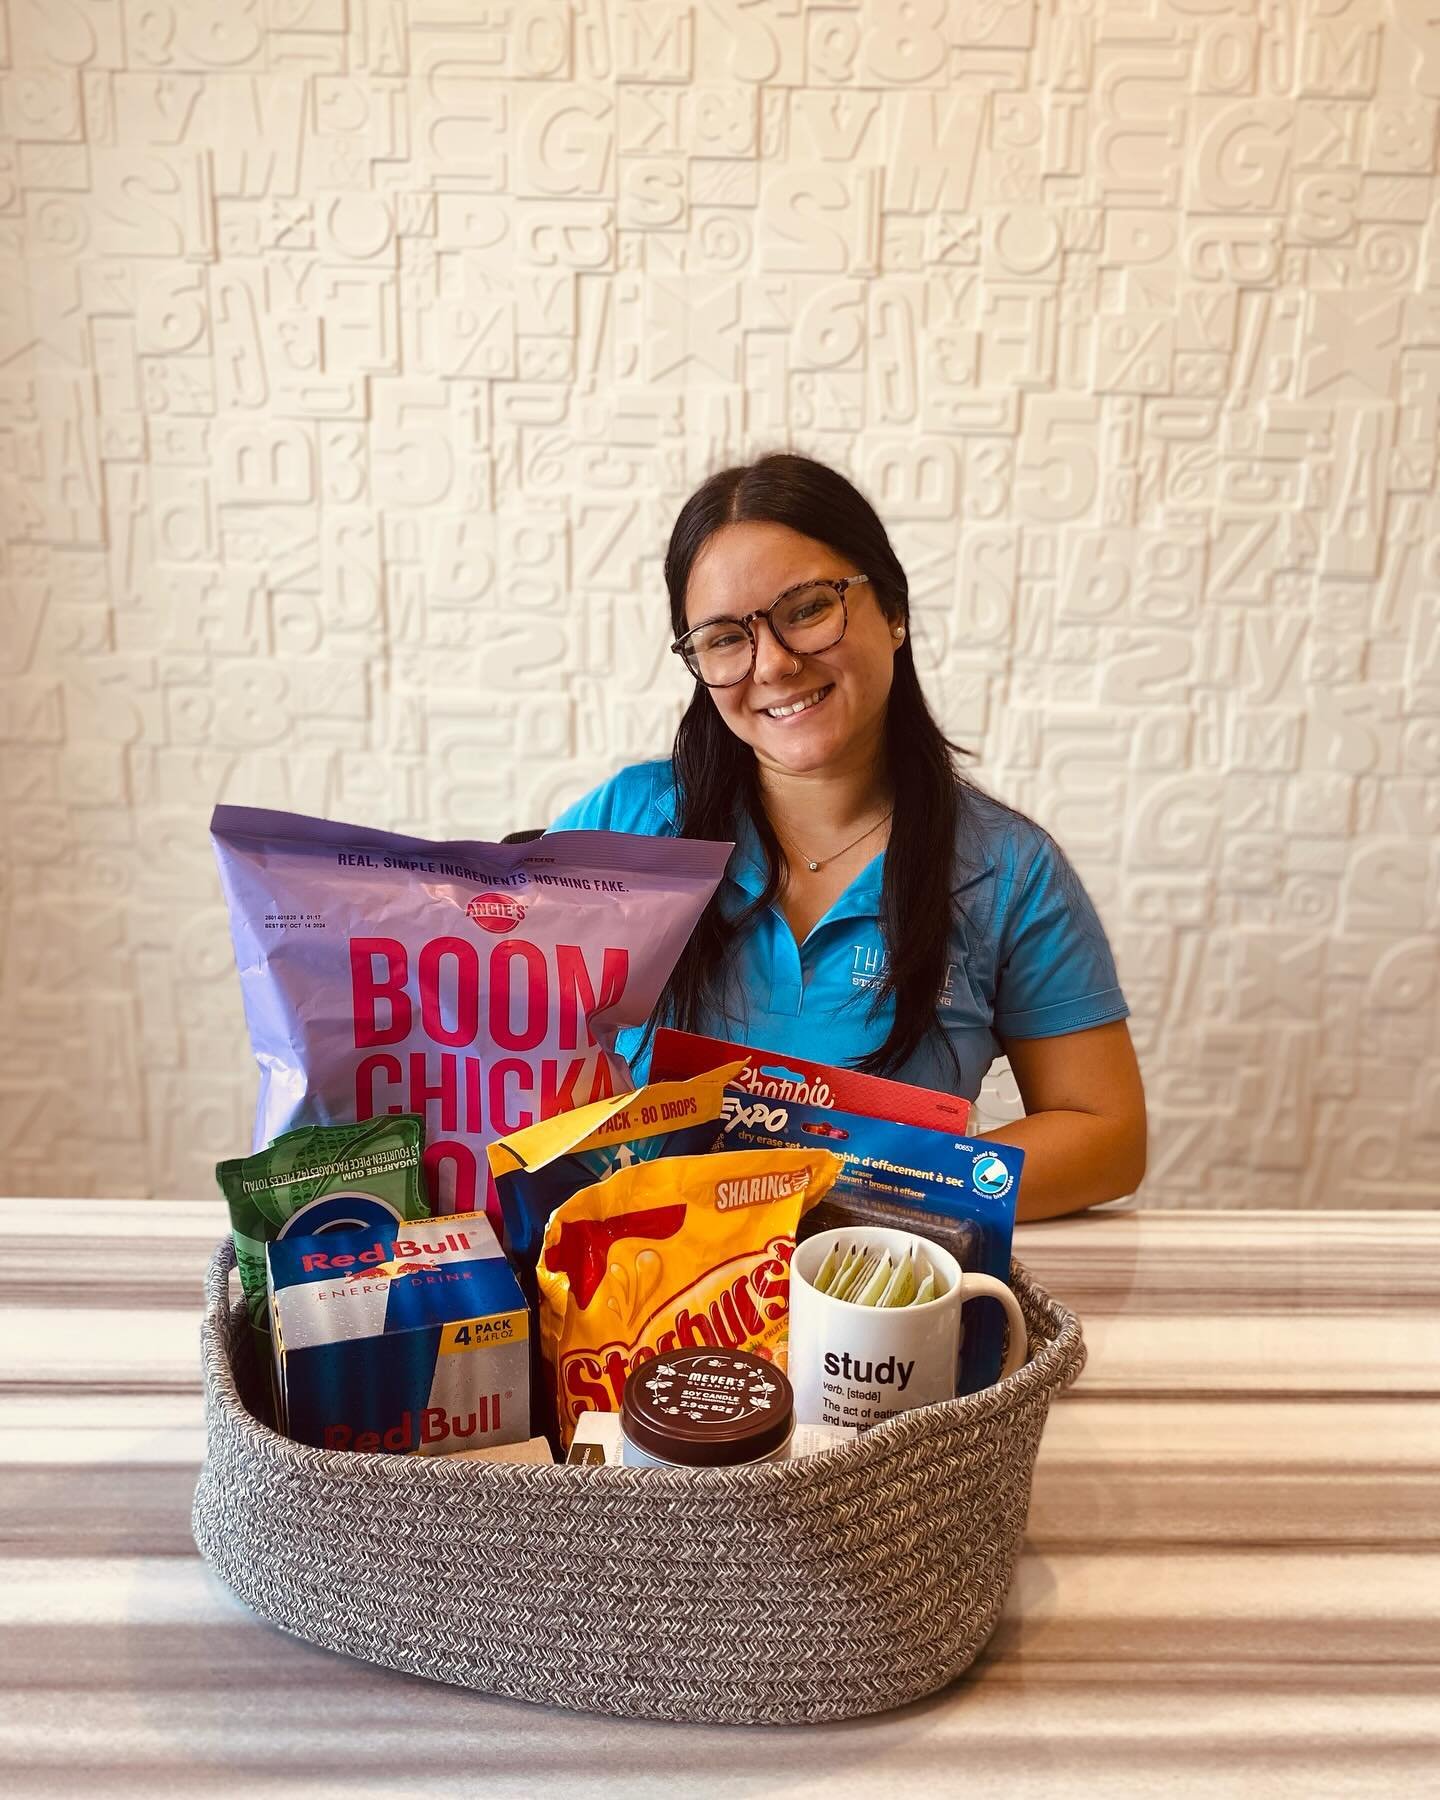 🚨 FINALS GIVEAWAY 🚨

Need to stock up on snacks and study materials for finals? 🤓 Enter this giveaway for a chance to have all your study sesh essentials! ⬇️

🍎 Tag a friend you&rsquo;ll be studying with this finals season
📘 Comment your favorit